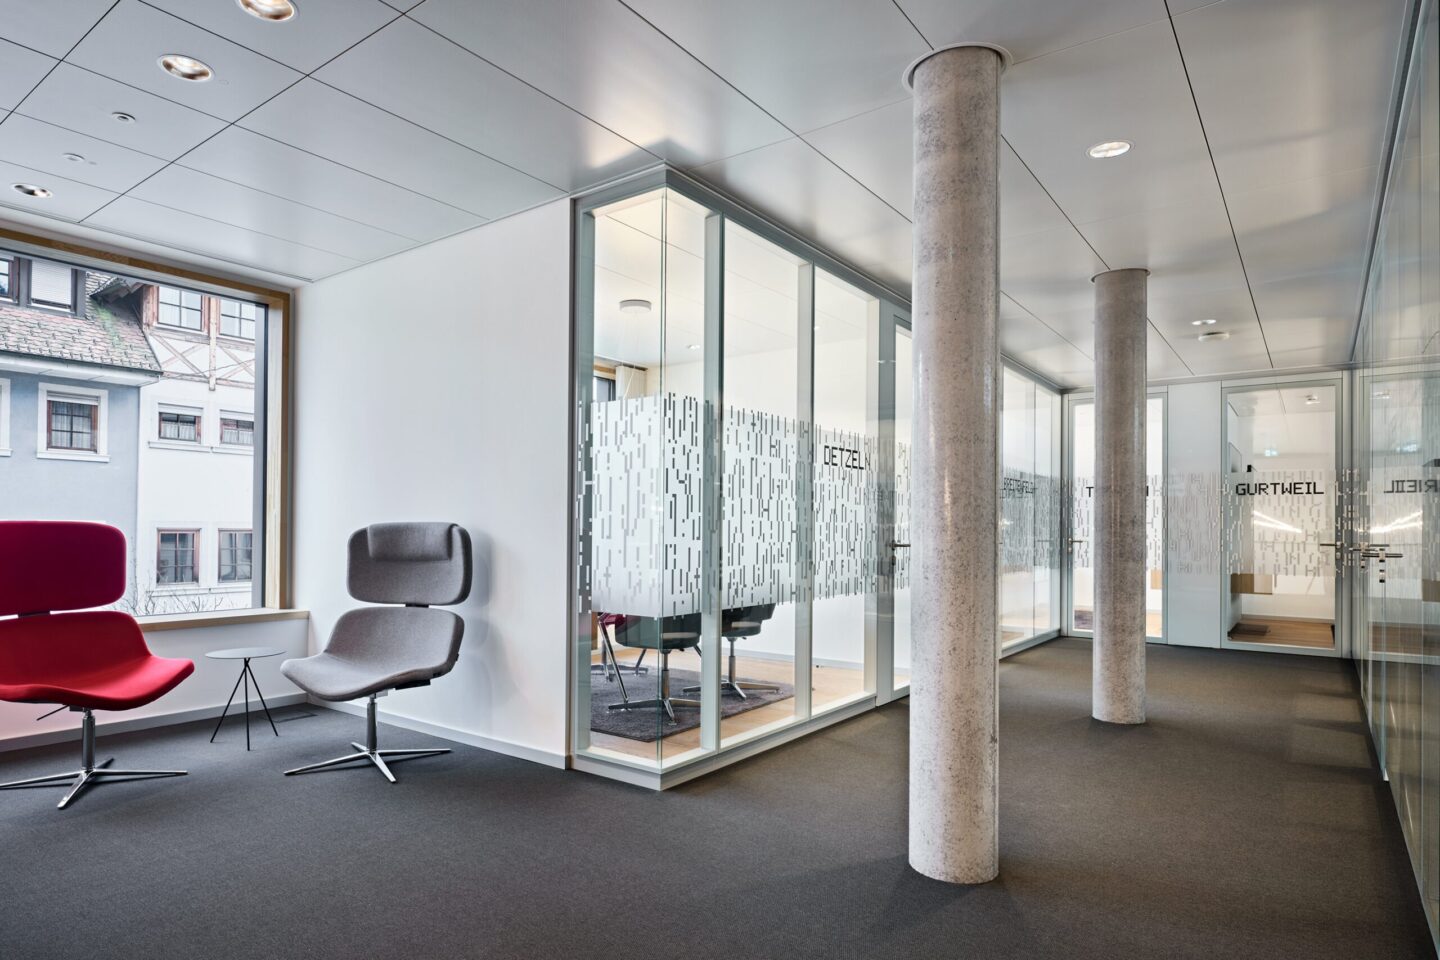 Sparkasse Hochrhein │ office spaces │ glass elements with anodised aluminum profiles